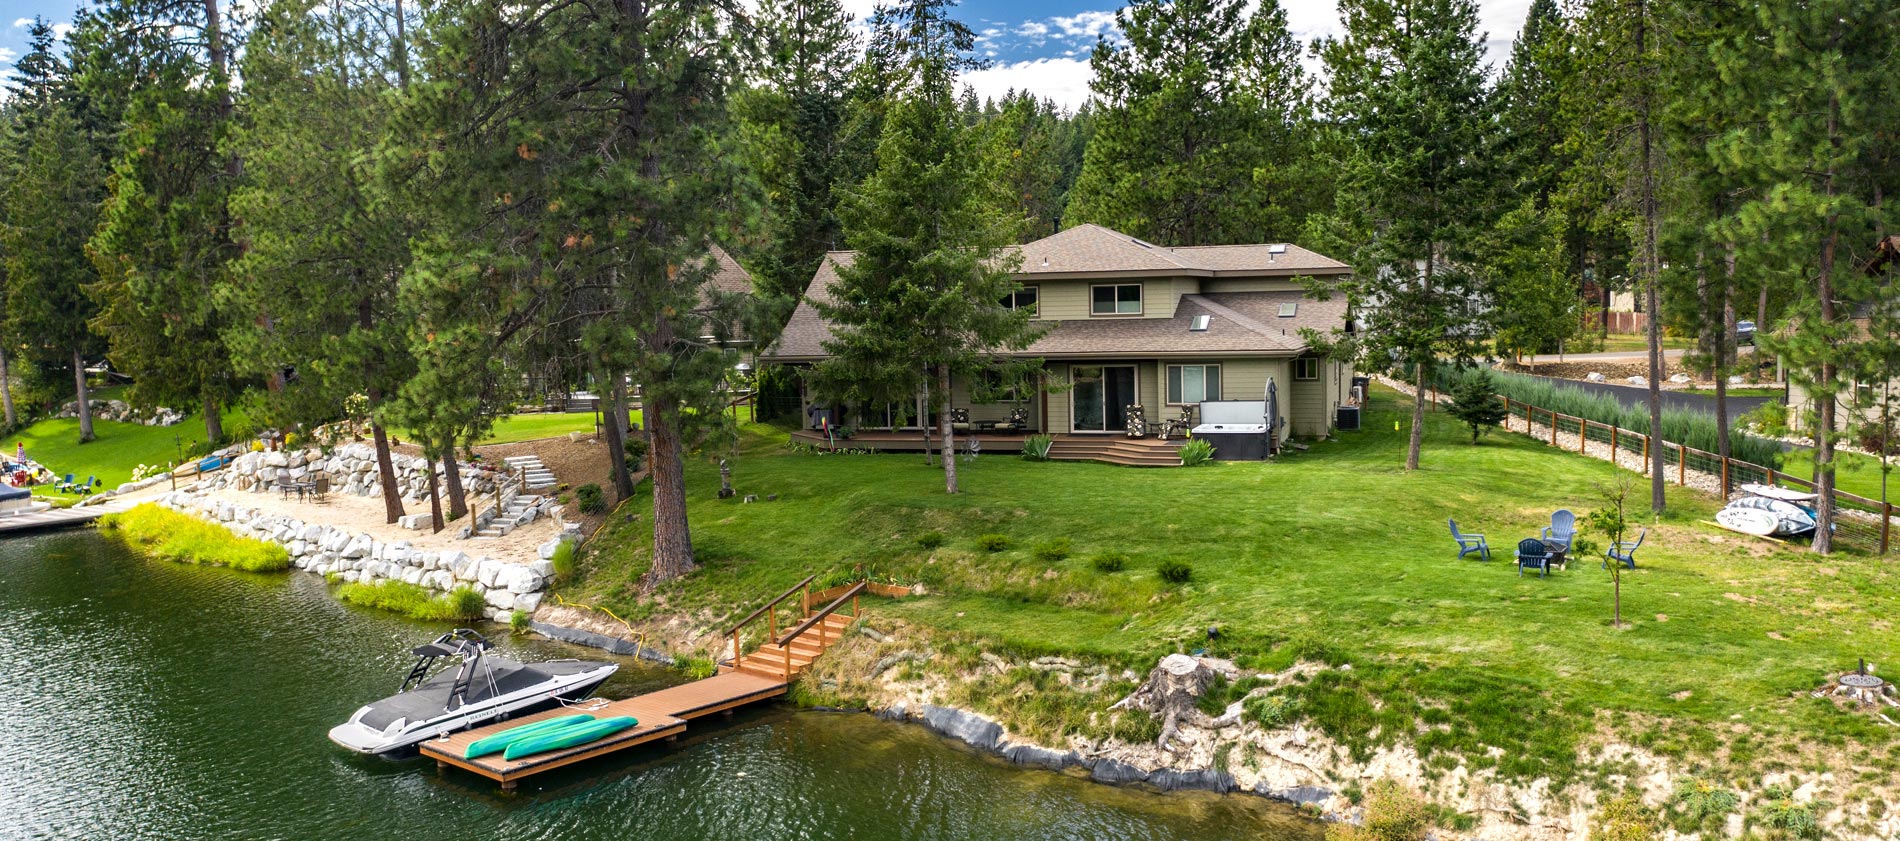 Wrap yourself in luxury in this absolutely stunning waterfront home, just two miles to Sandpoint